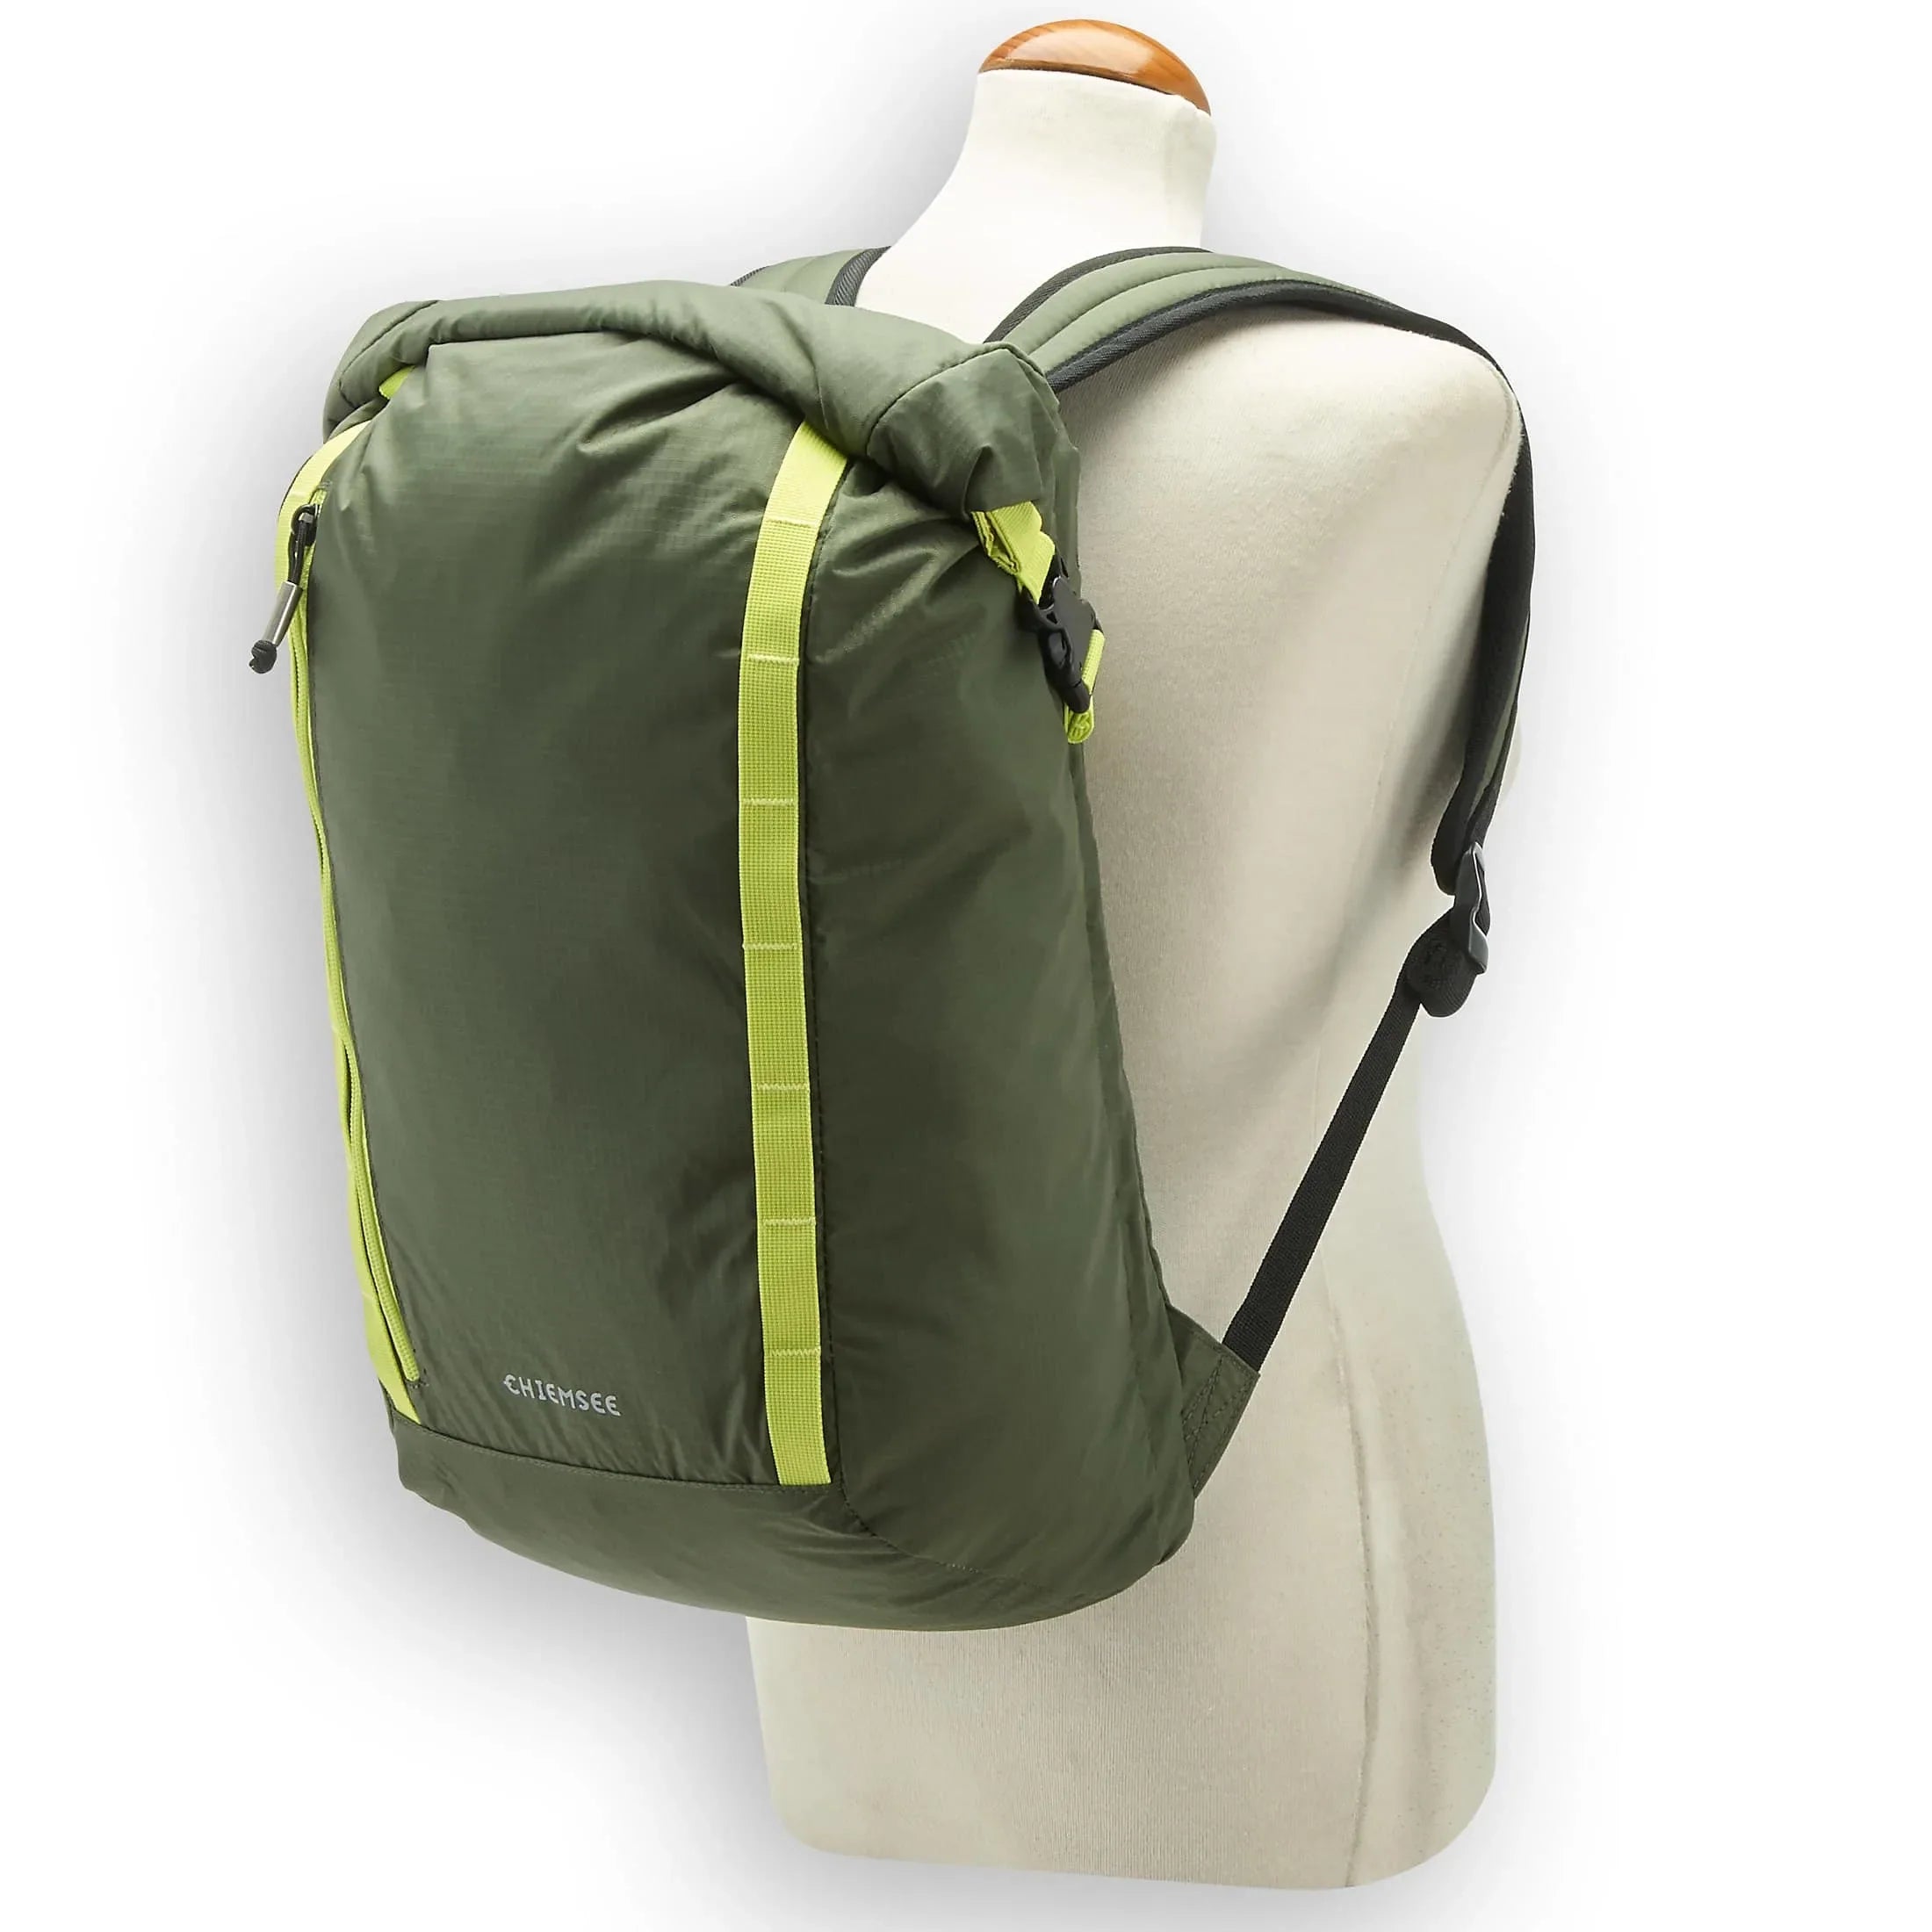 Chiemsee Sports & Travel Bags Daypack Rucksack 50 cm - dusty olive